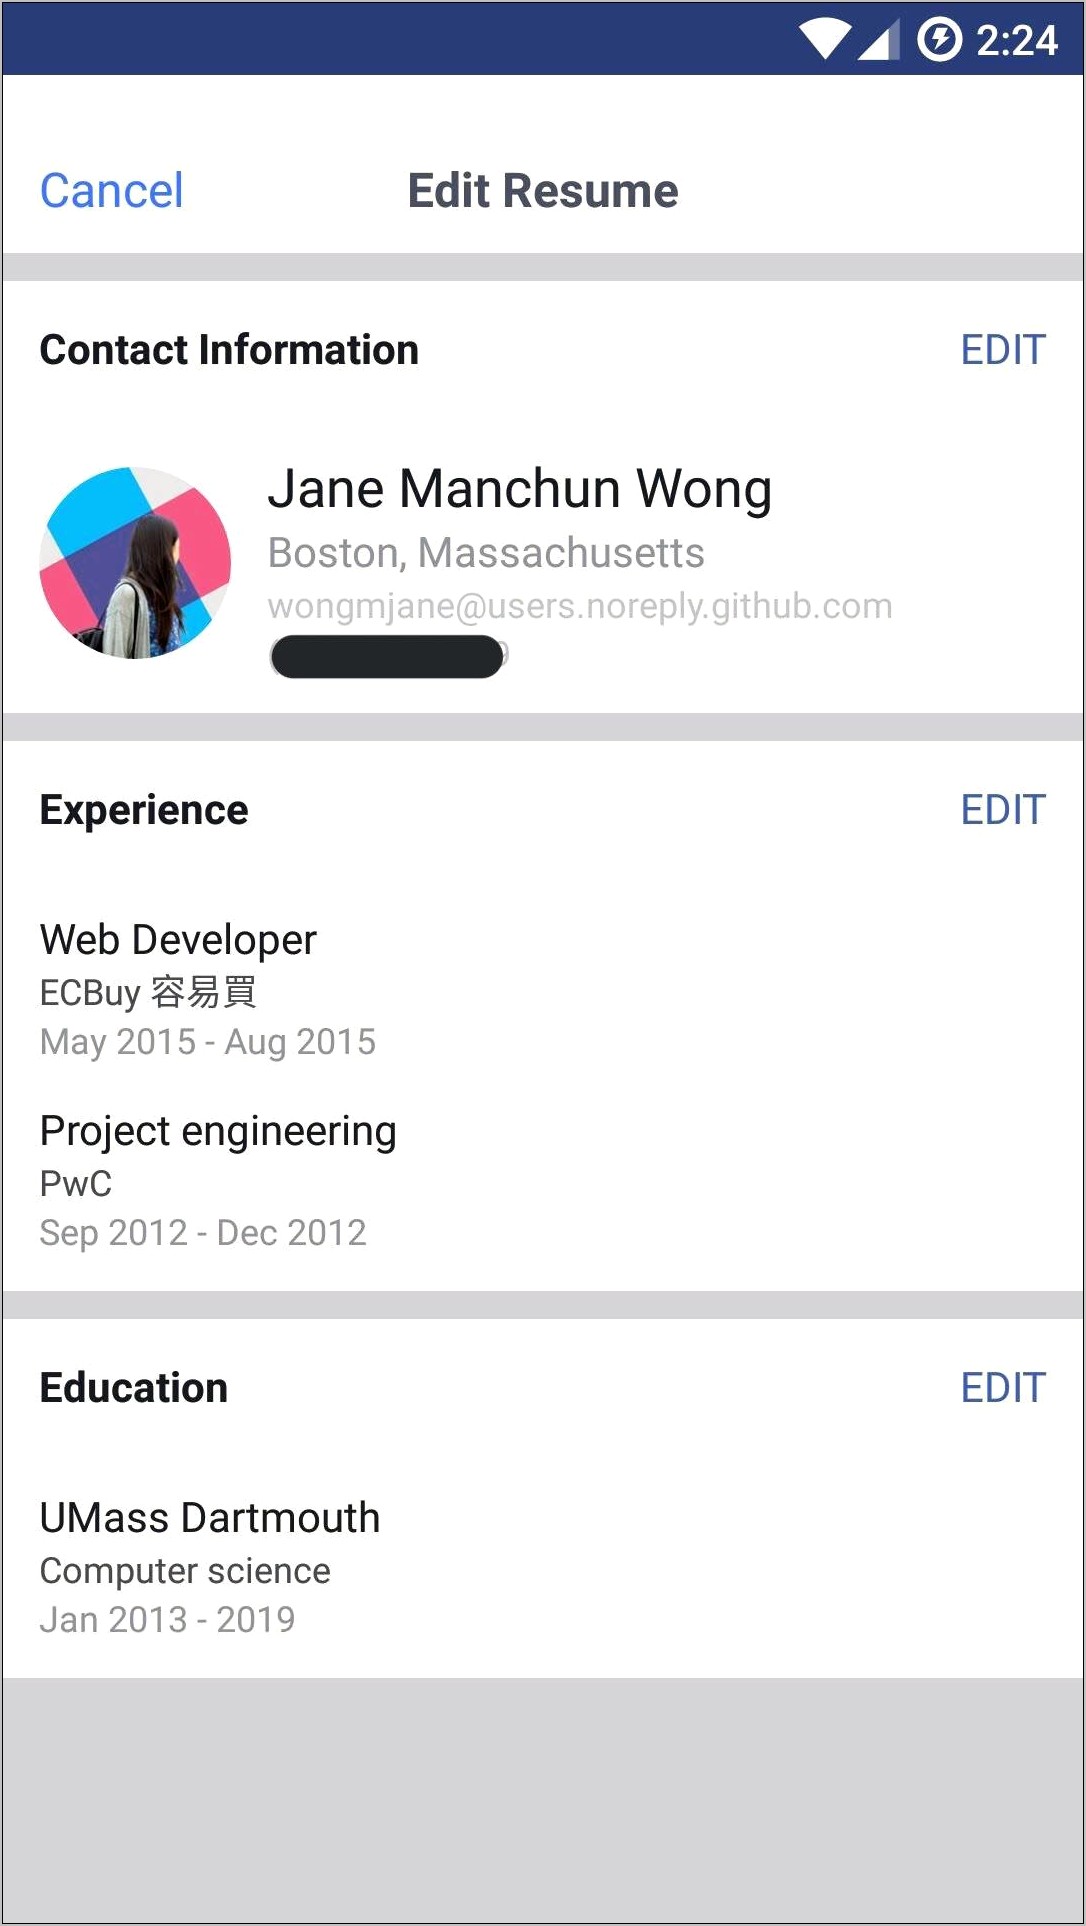 Facebook Get Resumes For Job Candidates